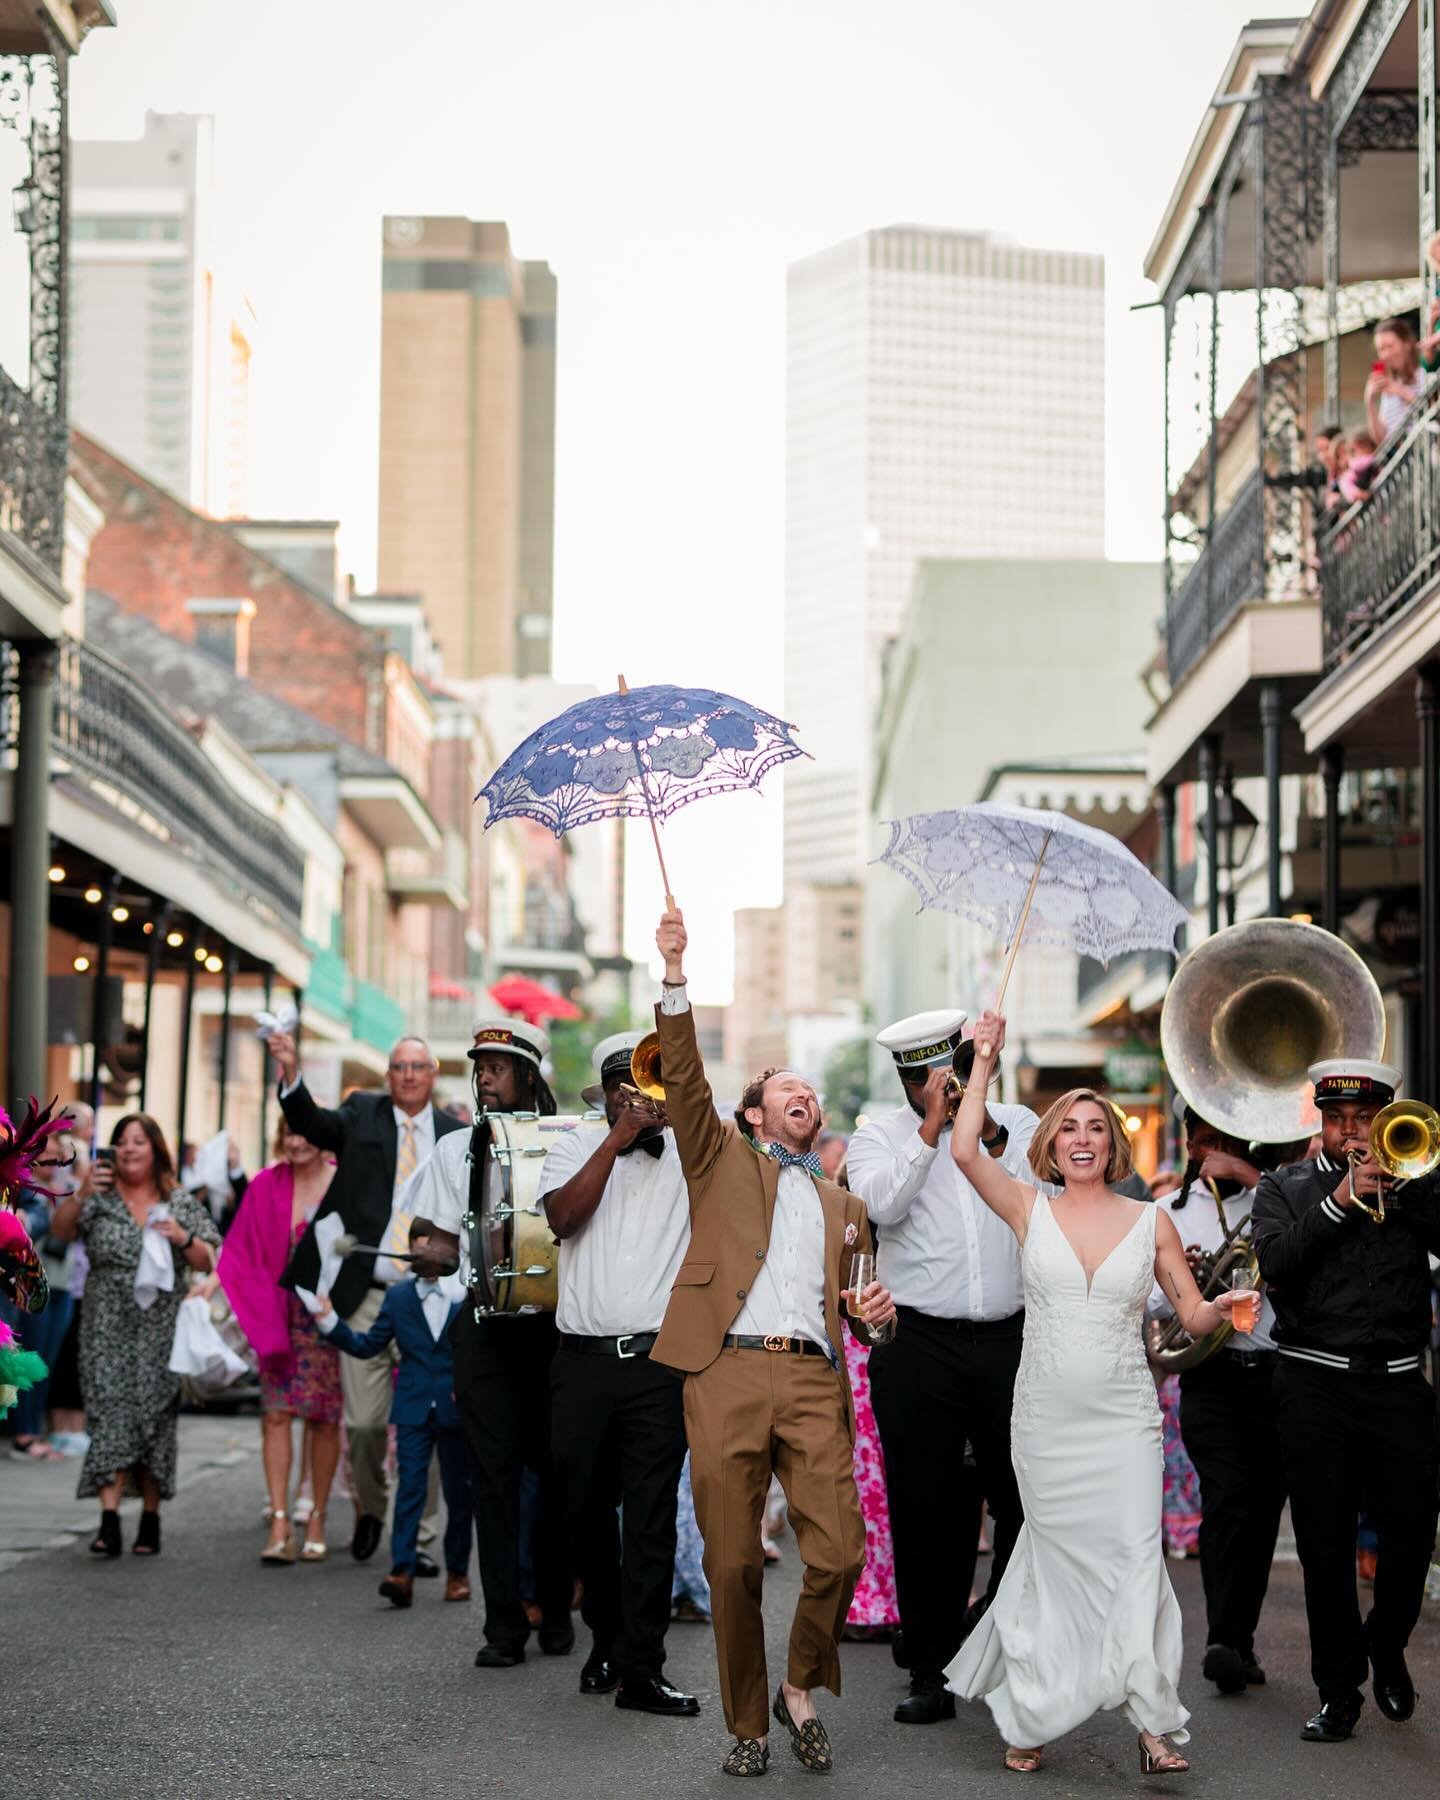 Eh just another Wednesday in New Orleans! Ashley and Nick came to paaartay! What a beautiful day.
📸 
.
.
Day of Coordinators @crimsonquarternola 
Brass Band @kinfolkbrassbandnola 
Venue @pharmacymuseum 
.
.
.
#neworleansphotographer #louisianaphotog